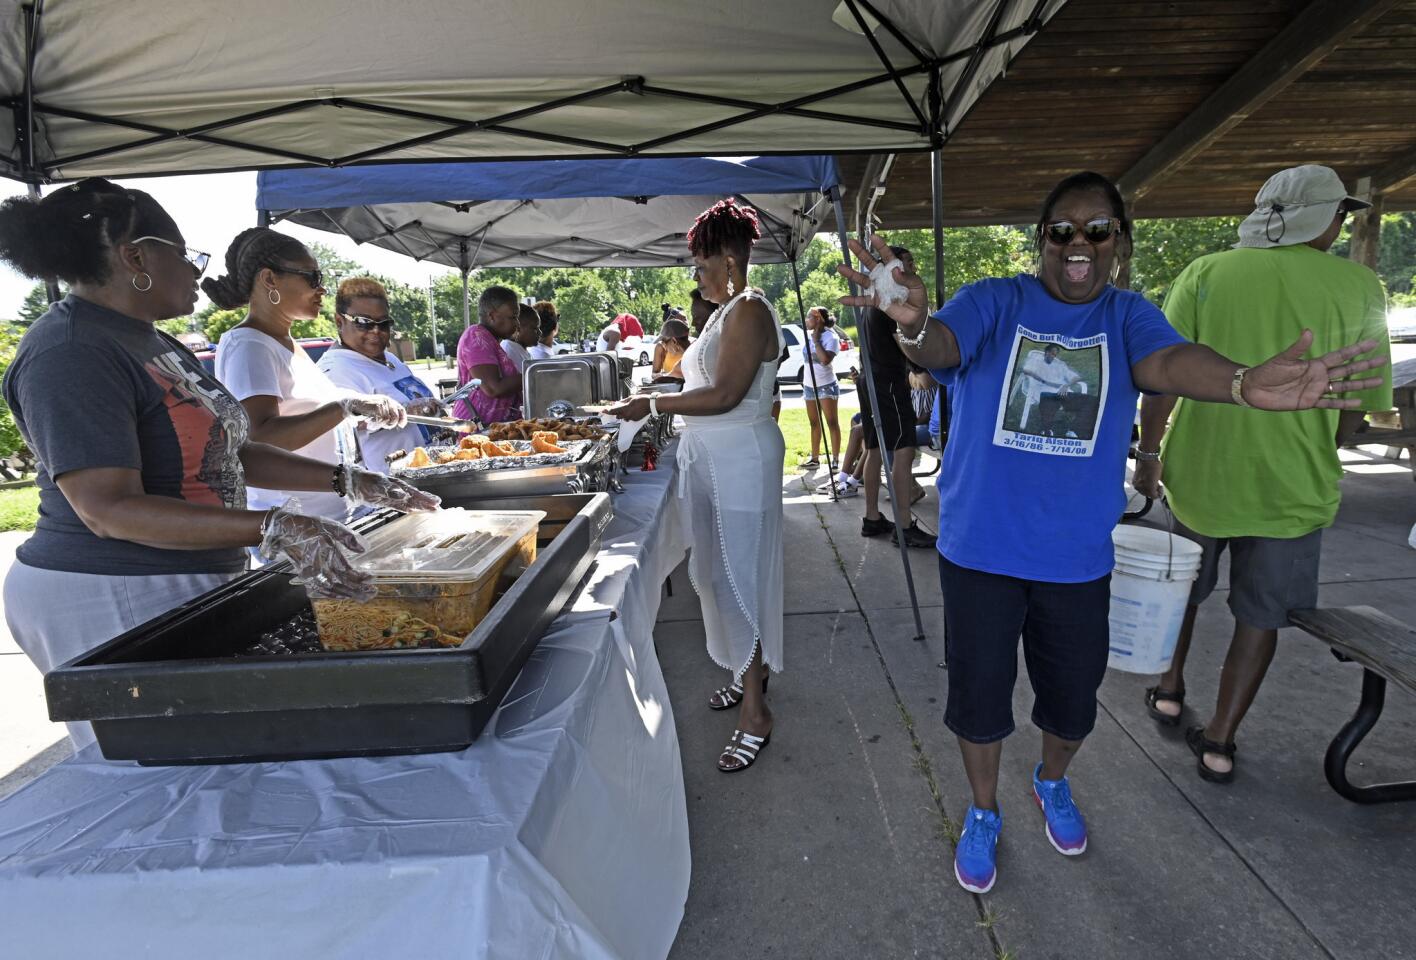 Daphne Alston, right, dances near the food line during the 10th annual Tariq's Memorial Cookout at Turner Station Park. Her son Tariq Alston, 22, was killed July 14, 2008 in Joppa and the case remains unsolved.